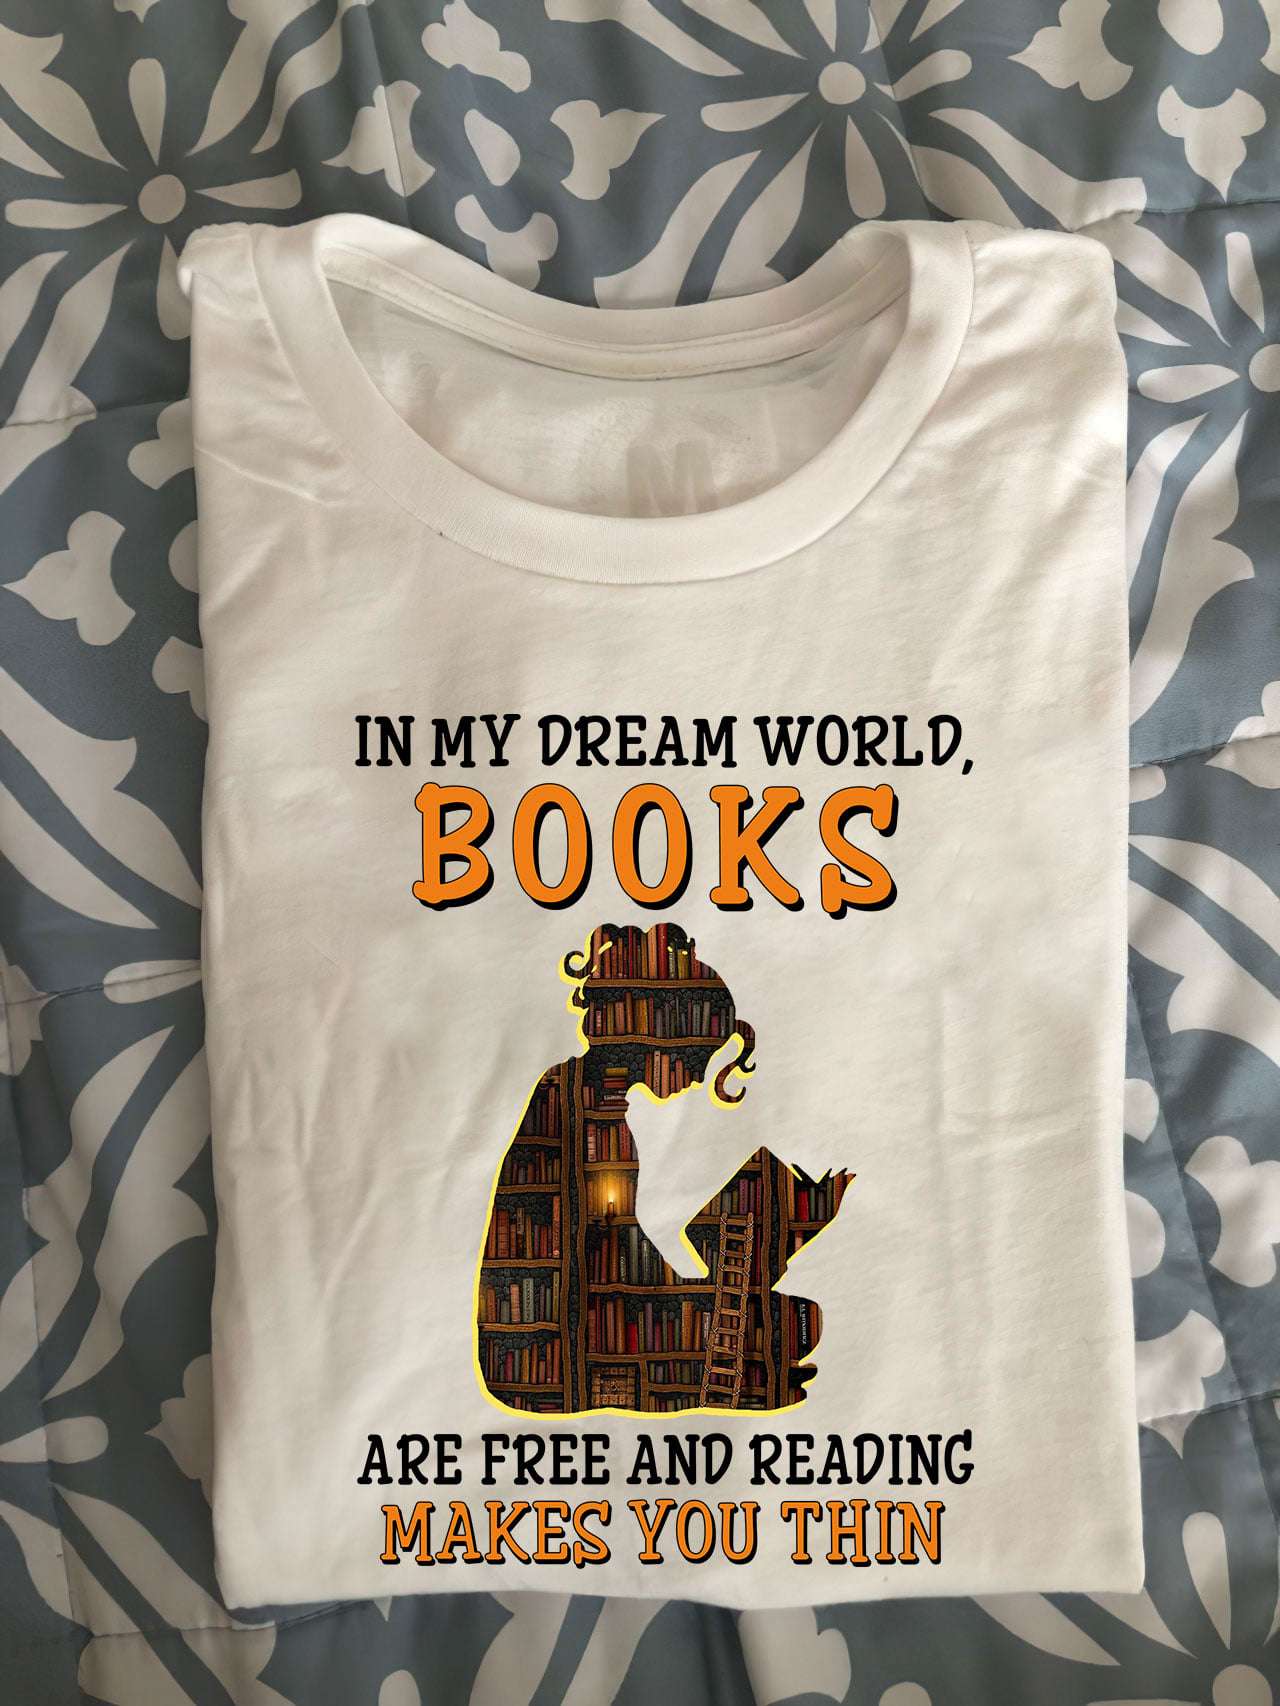 In my dream world, books are free and reading makes you thin - Girl reading books, bookaholic girl